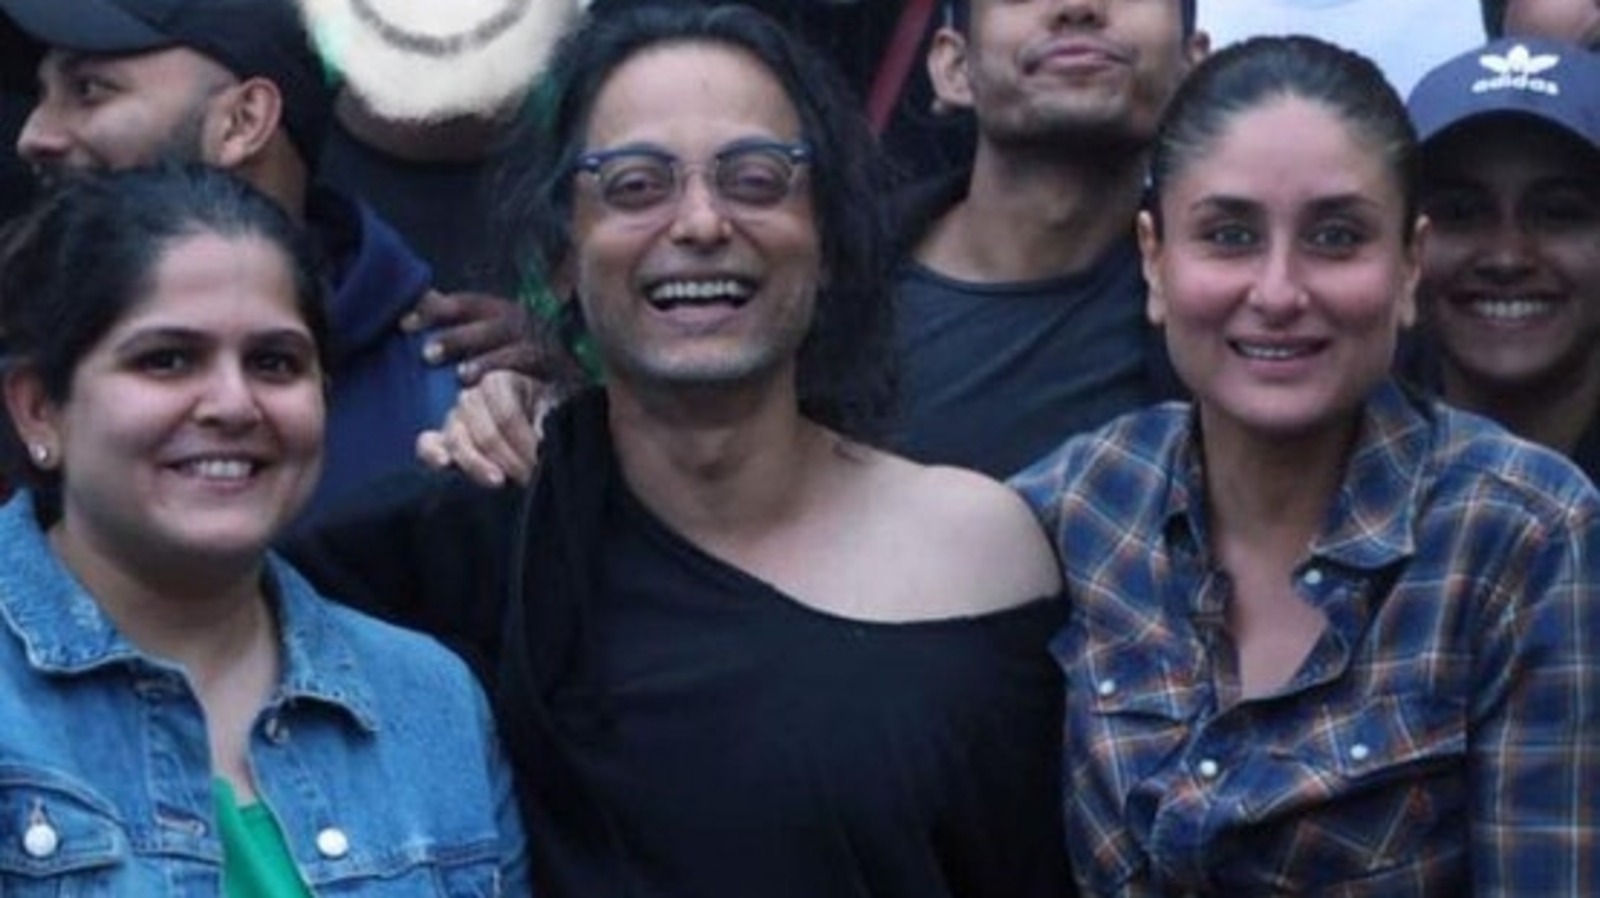 Fan posts Kareena Kapoor, Sujoy Ghosh’s BTS pic from The Devotion of Suspect X set; director asks ‘how do you get these’